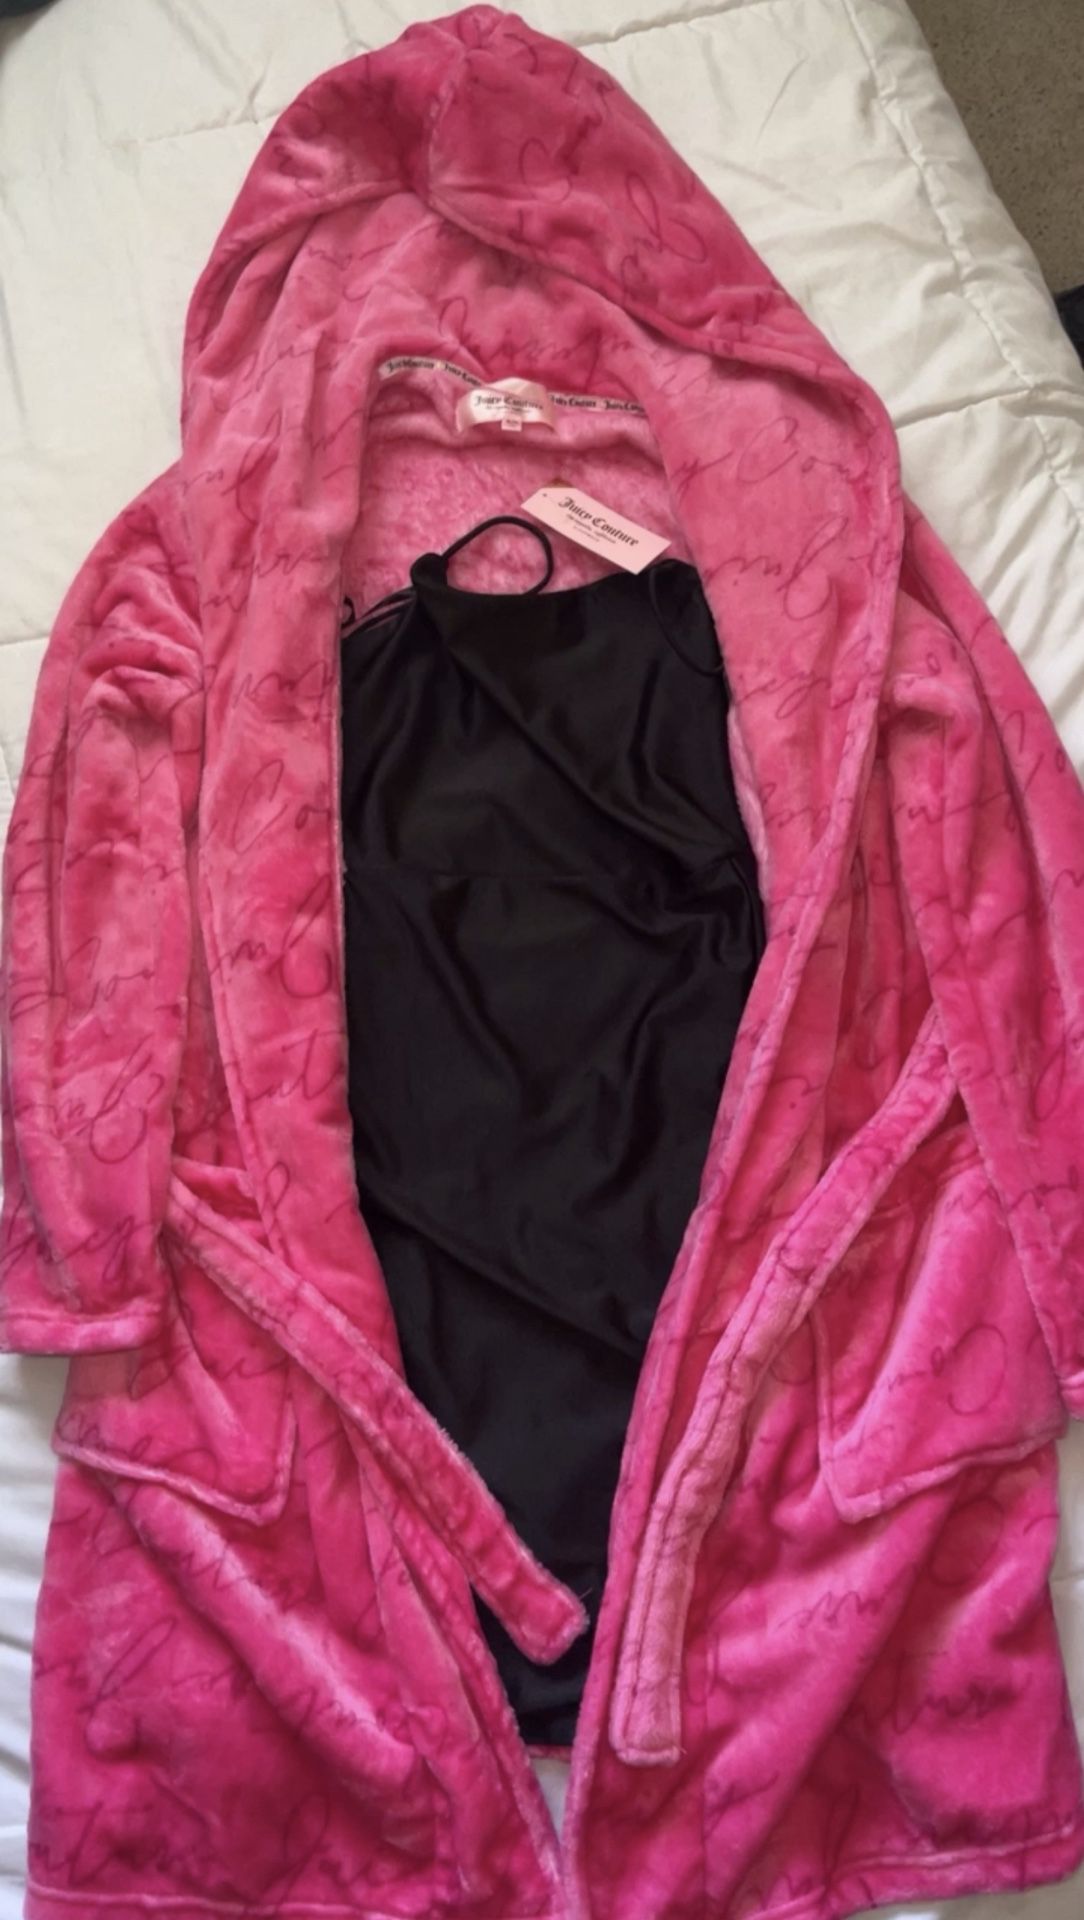 Hot Pink Juicy Couture Robe With Black Night Gown Included!